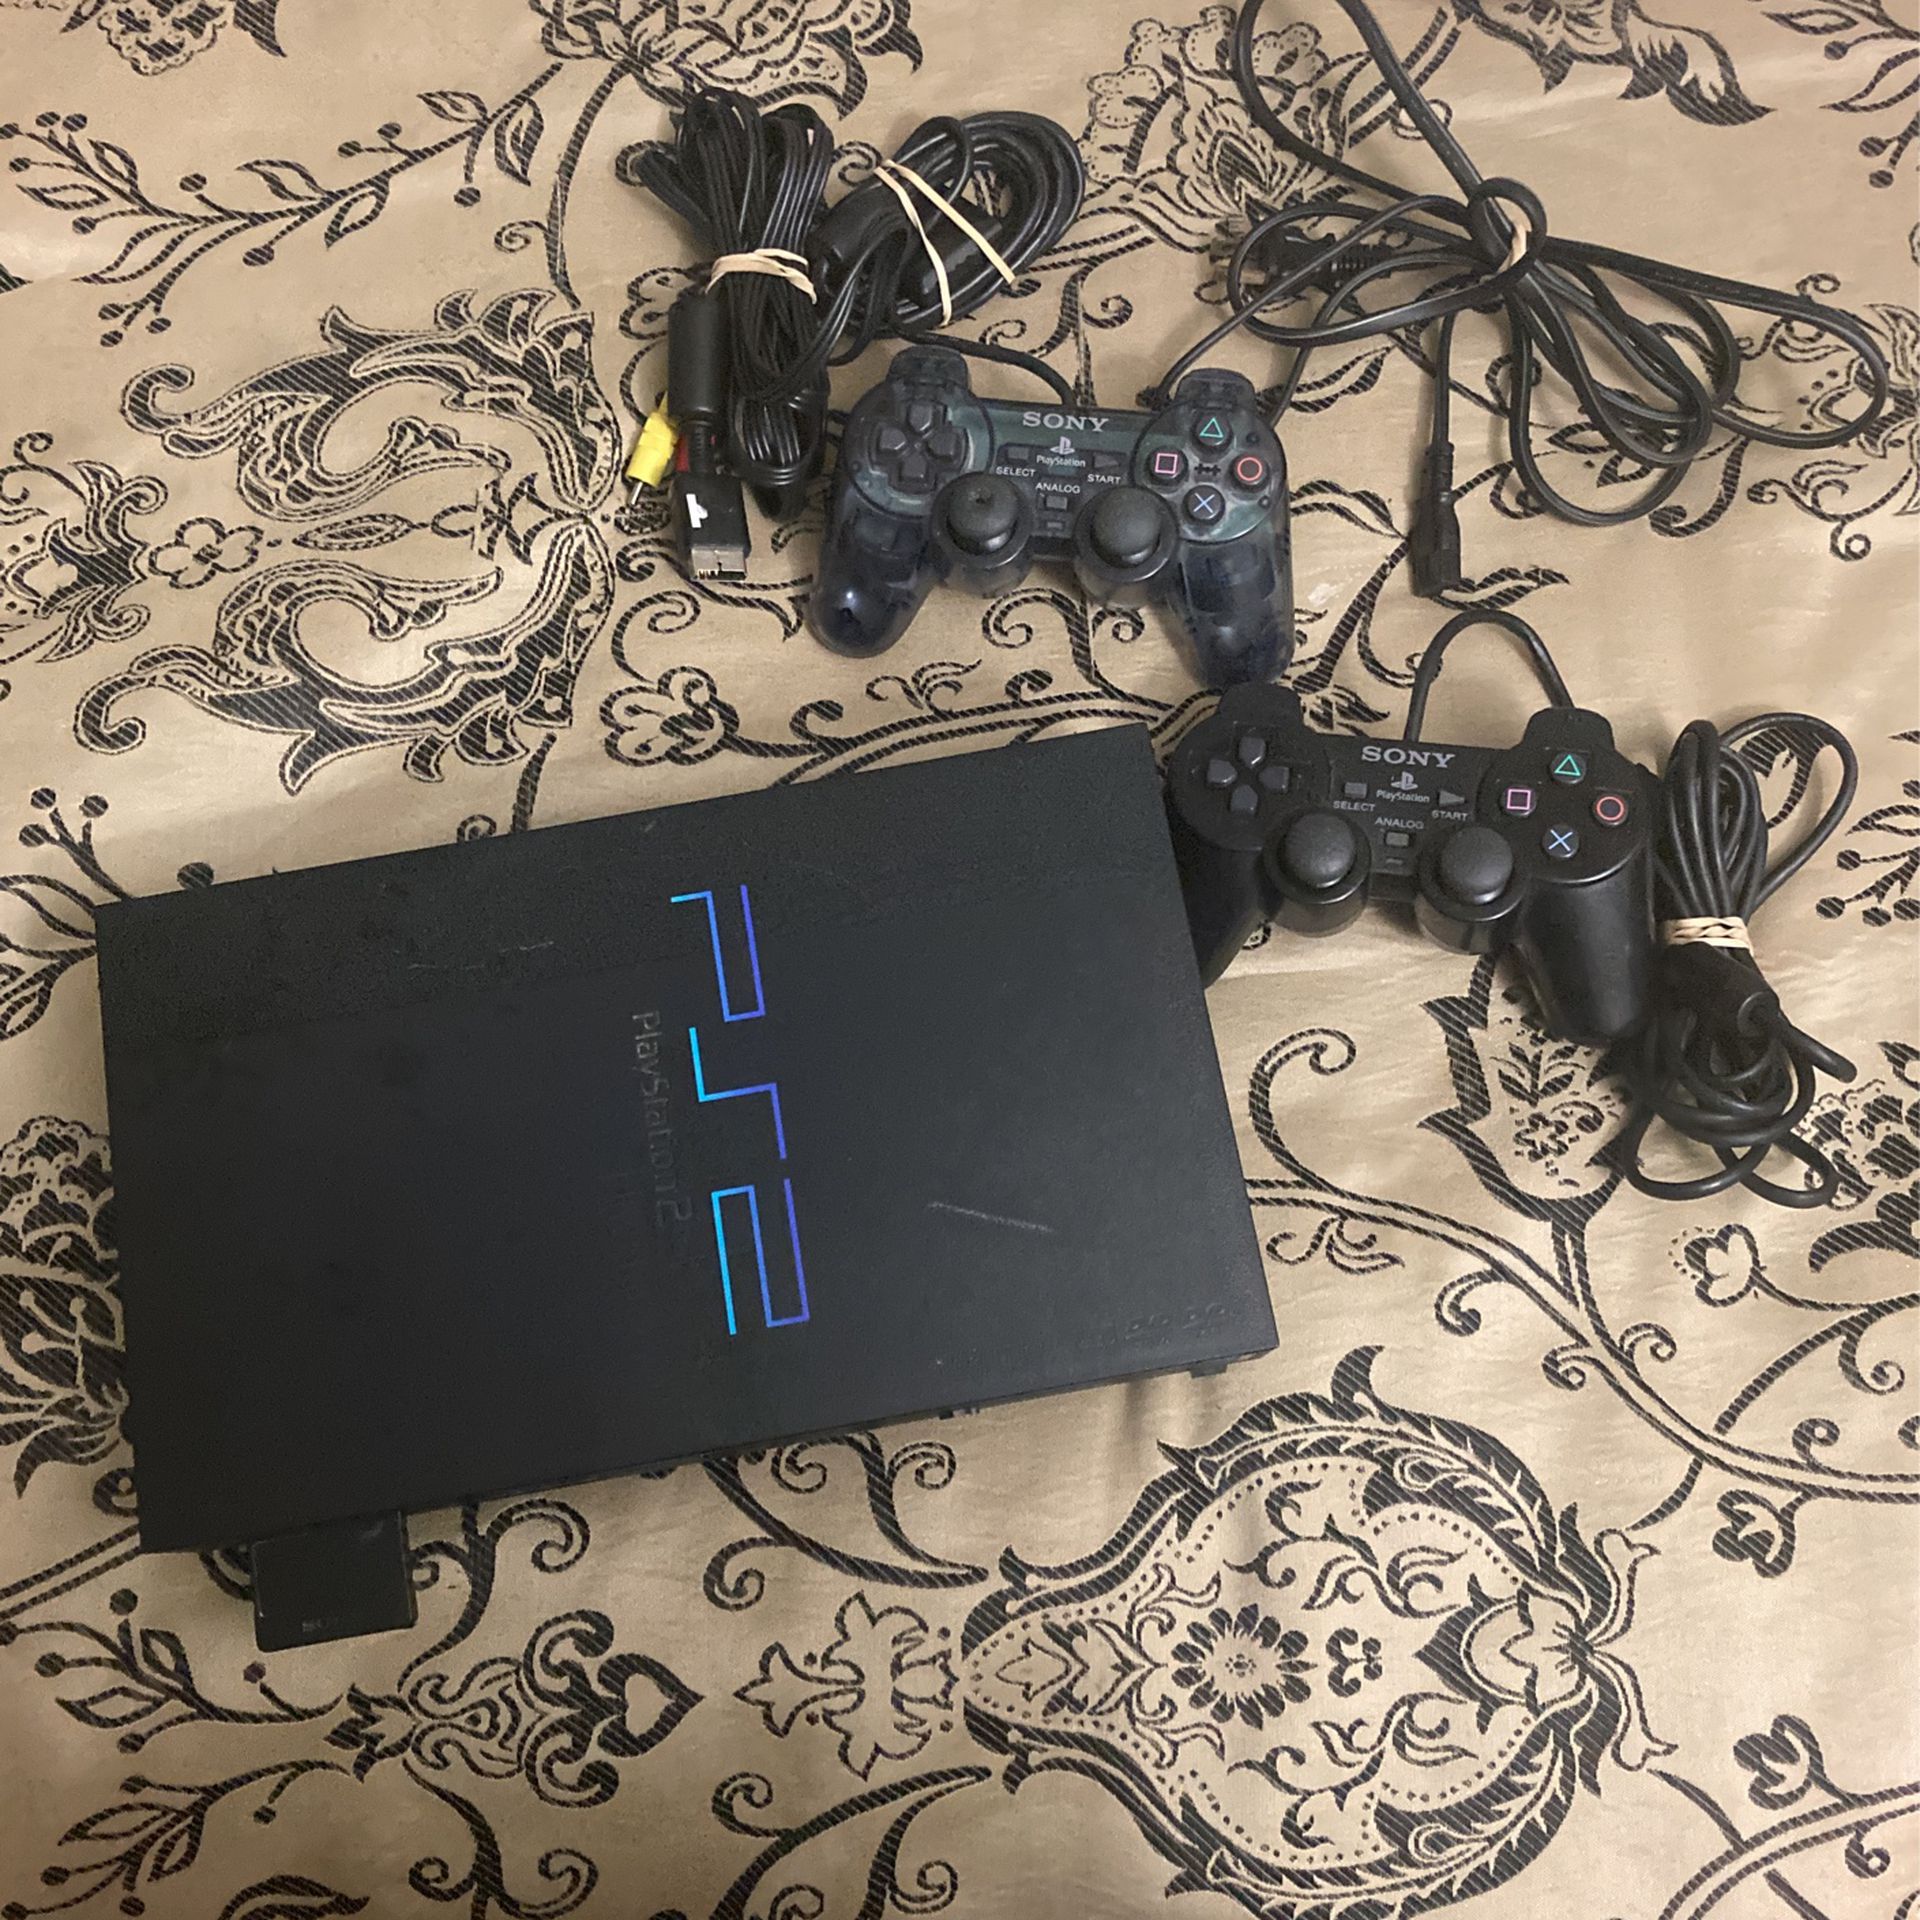 Star Wars Battlefront 2 PS2 for Sale in Stockton, CA - OfferUp